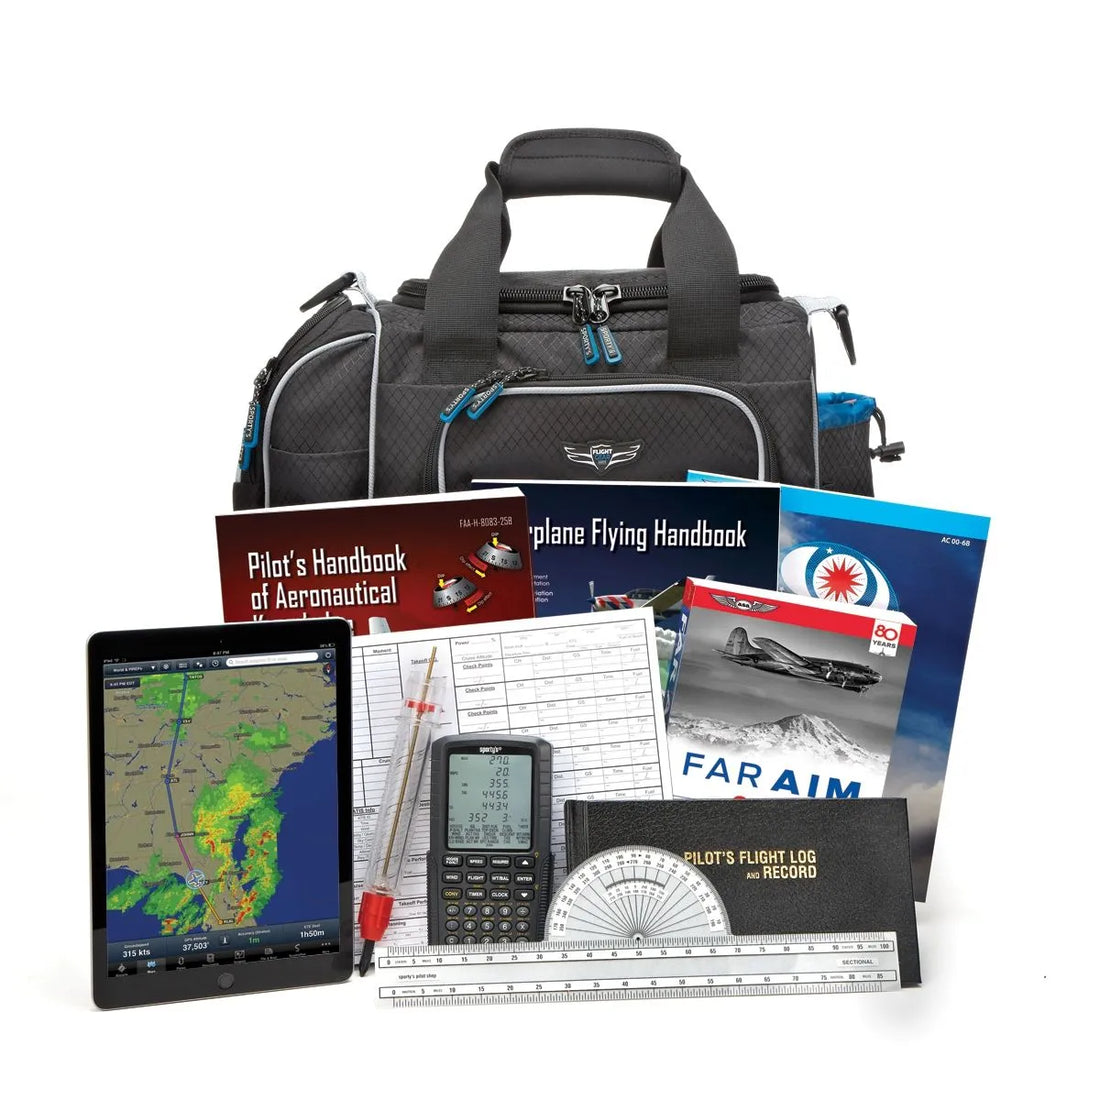 What Training Materials Should I Use For My Flight Training?